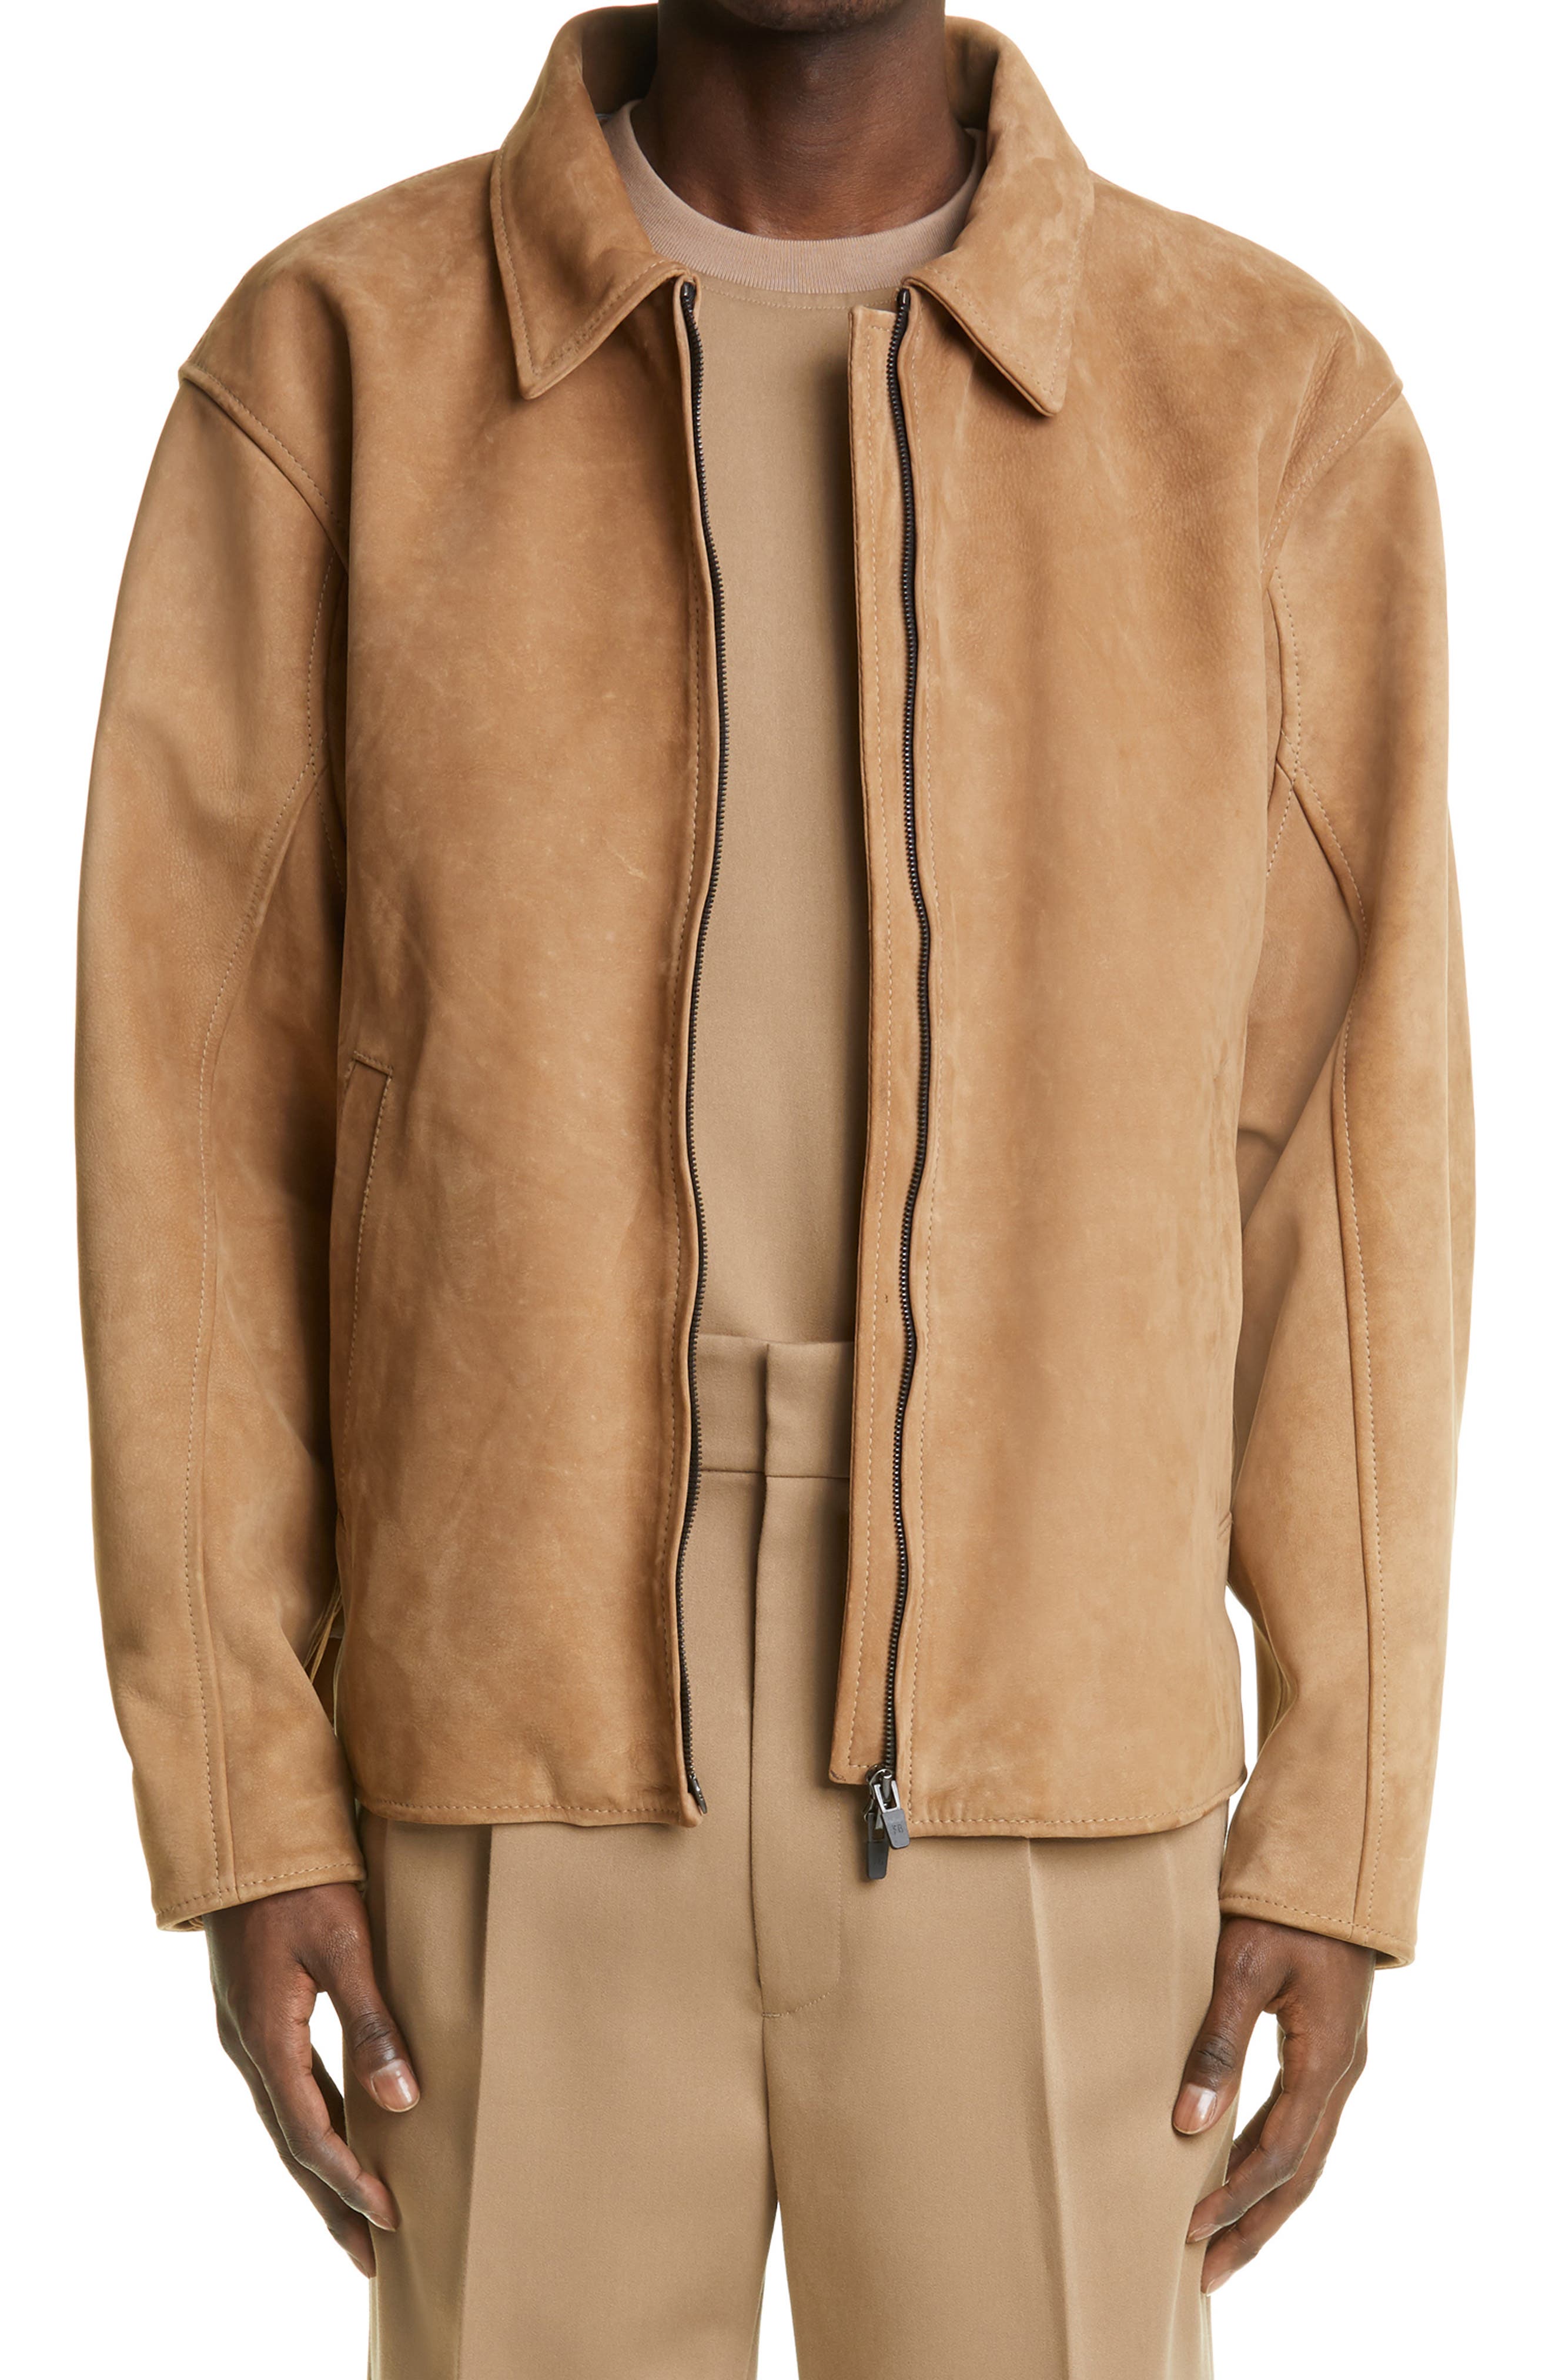 Fear of God Nubuck Leather Jacket in Tan at Nordstrom, Size Medium